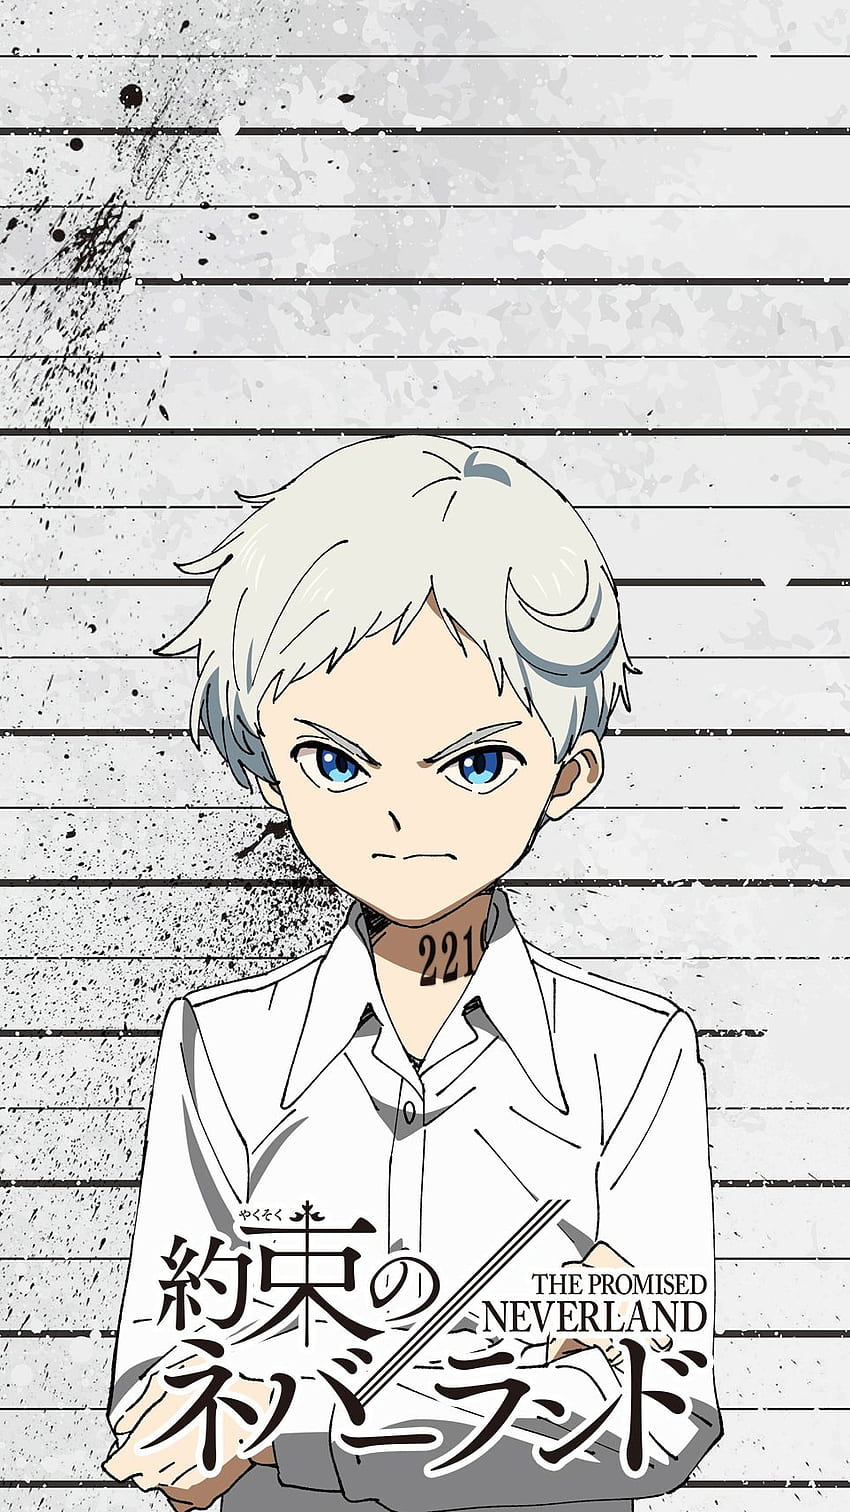 3 Reasons Why The Promised Neverland Episode 1 Was Perfect  Anime Shelter   Anime Neverland art Neverland